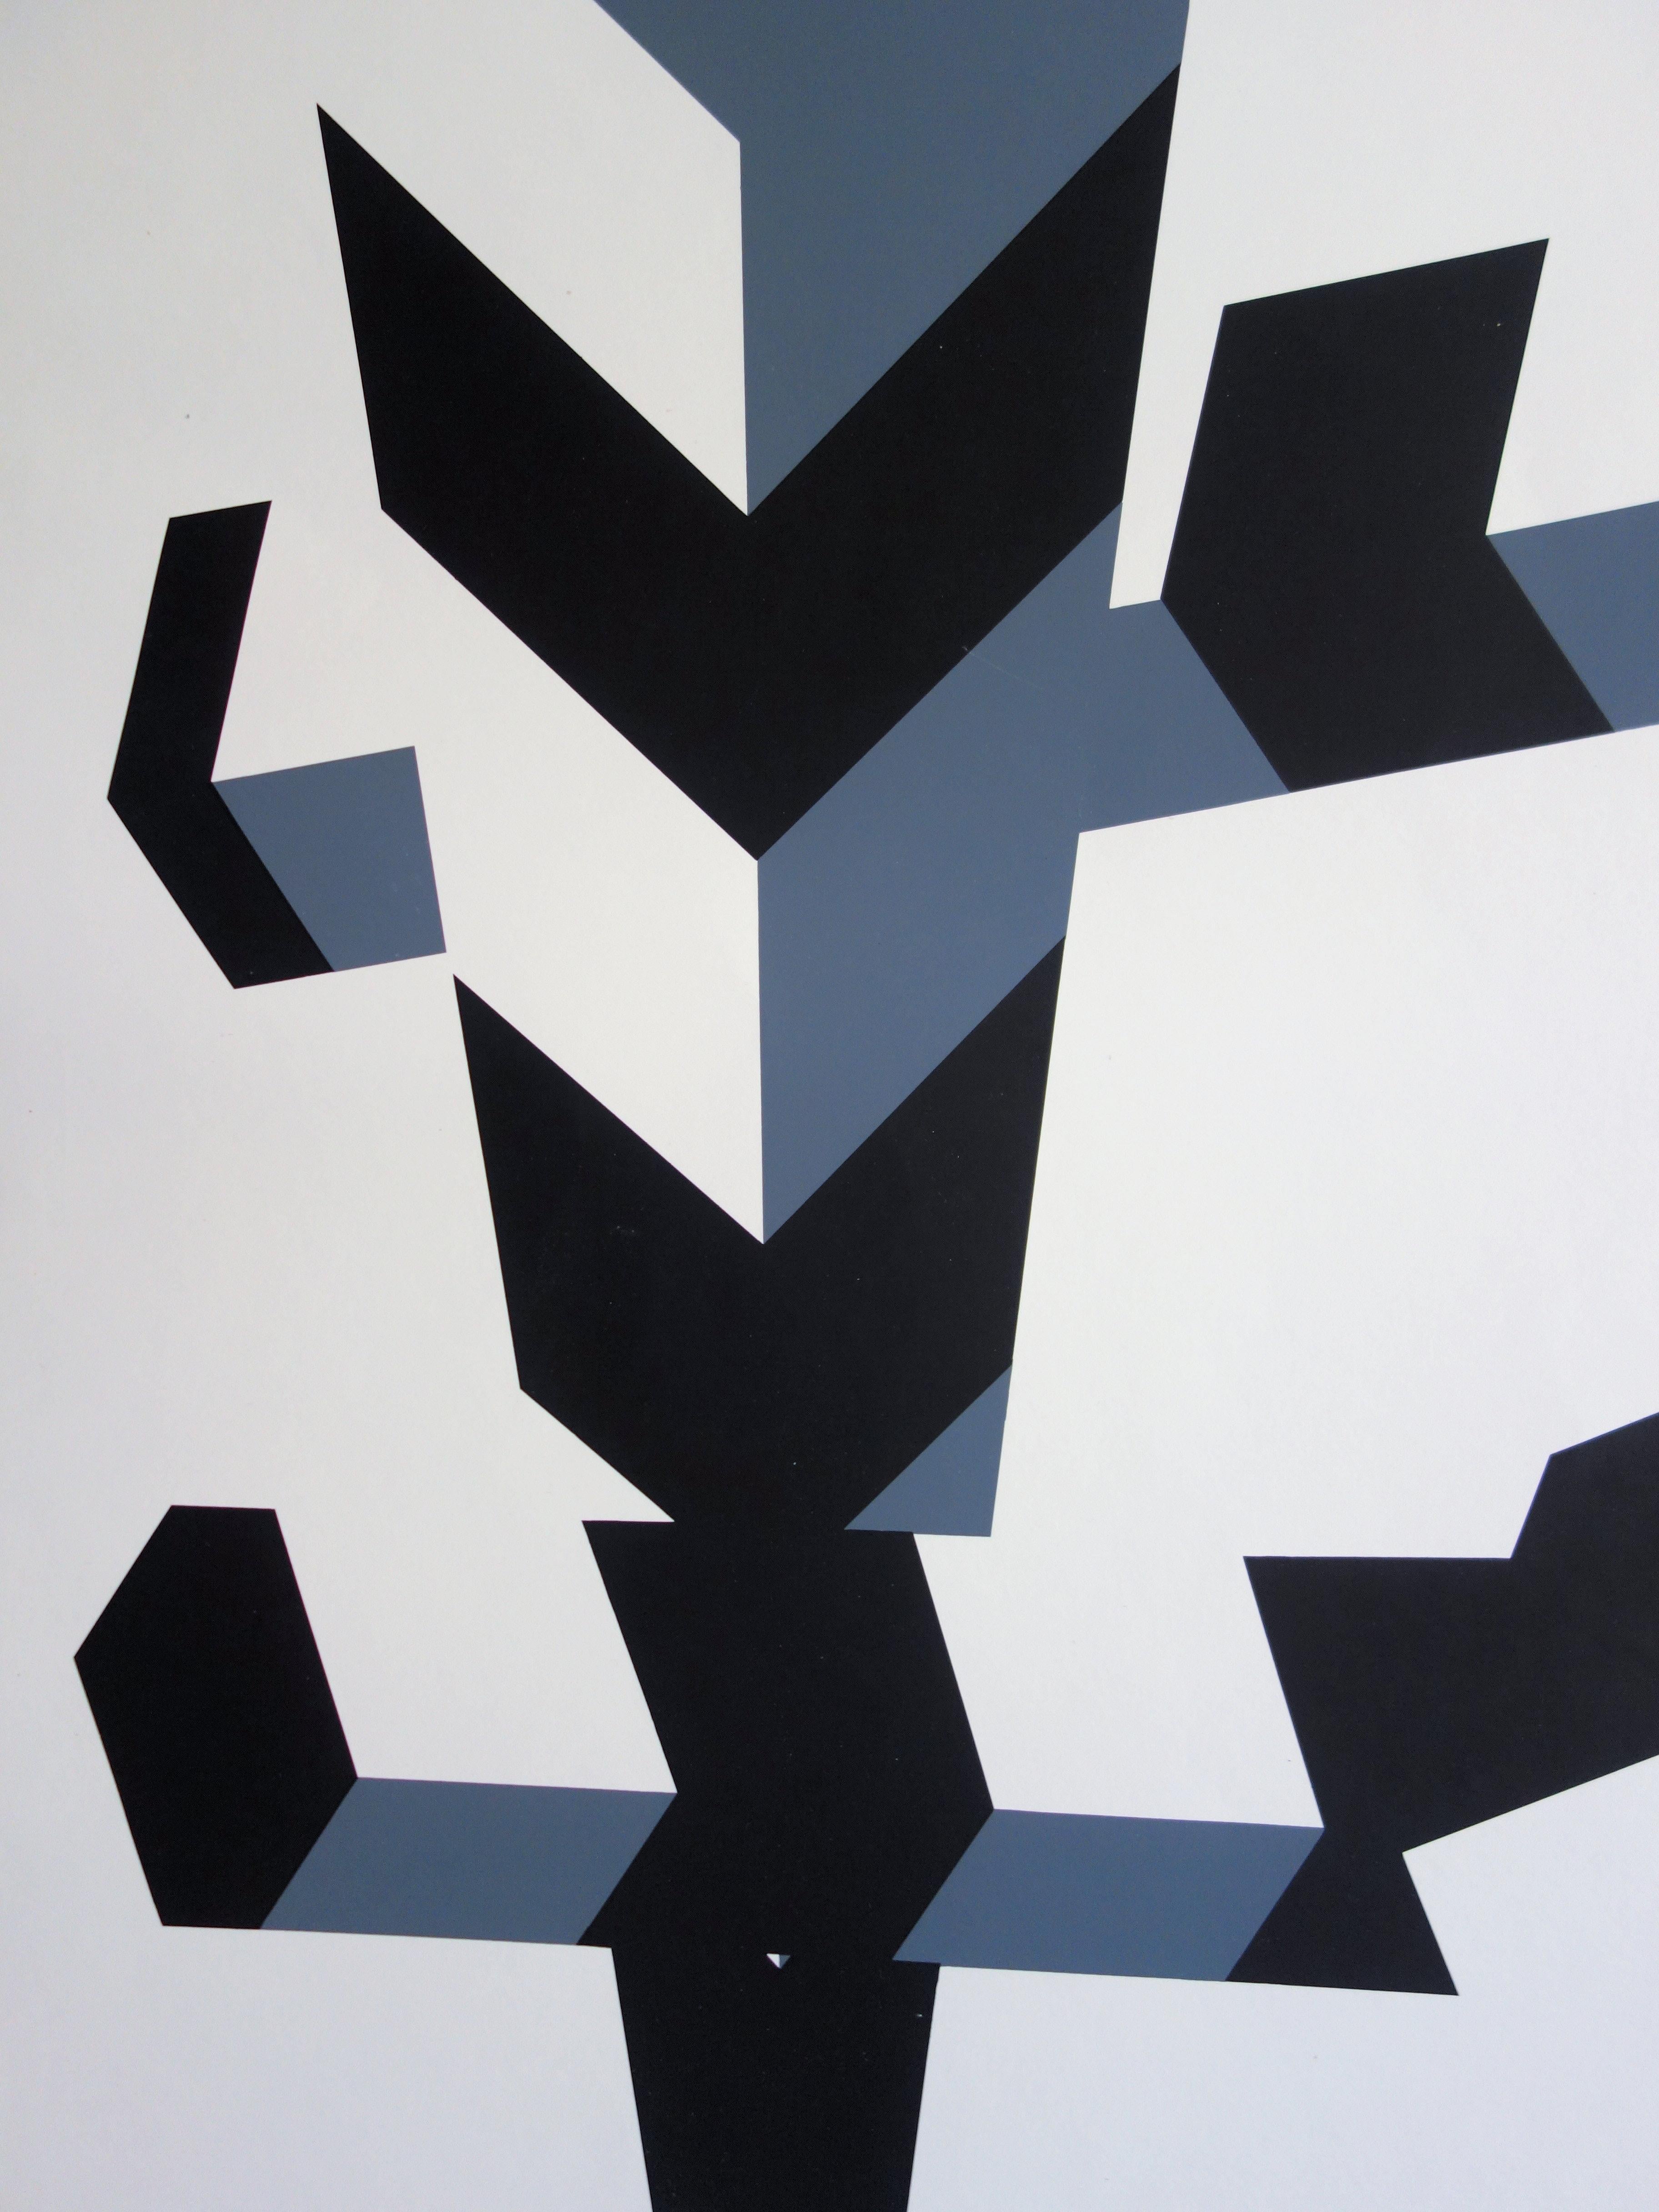 Abstract Cinetic Composition - Screenprint (Olympic Games Munich 1972) - Gray Abstract Print by Allan D'Arcangelo